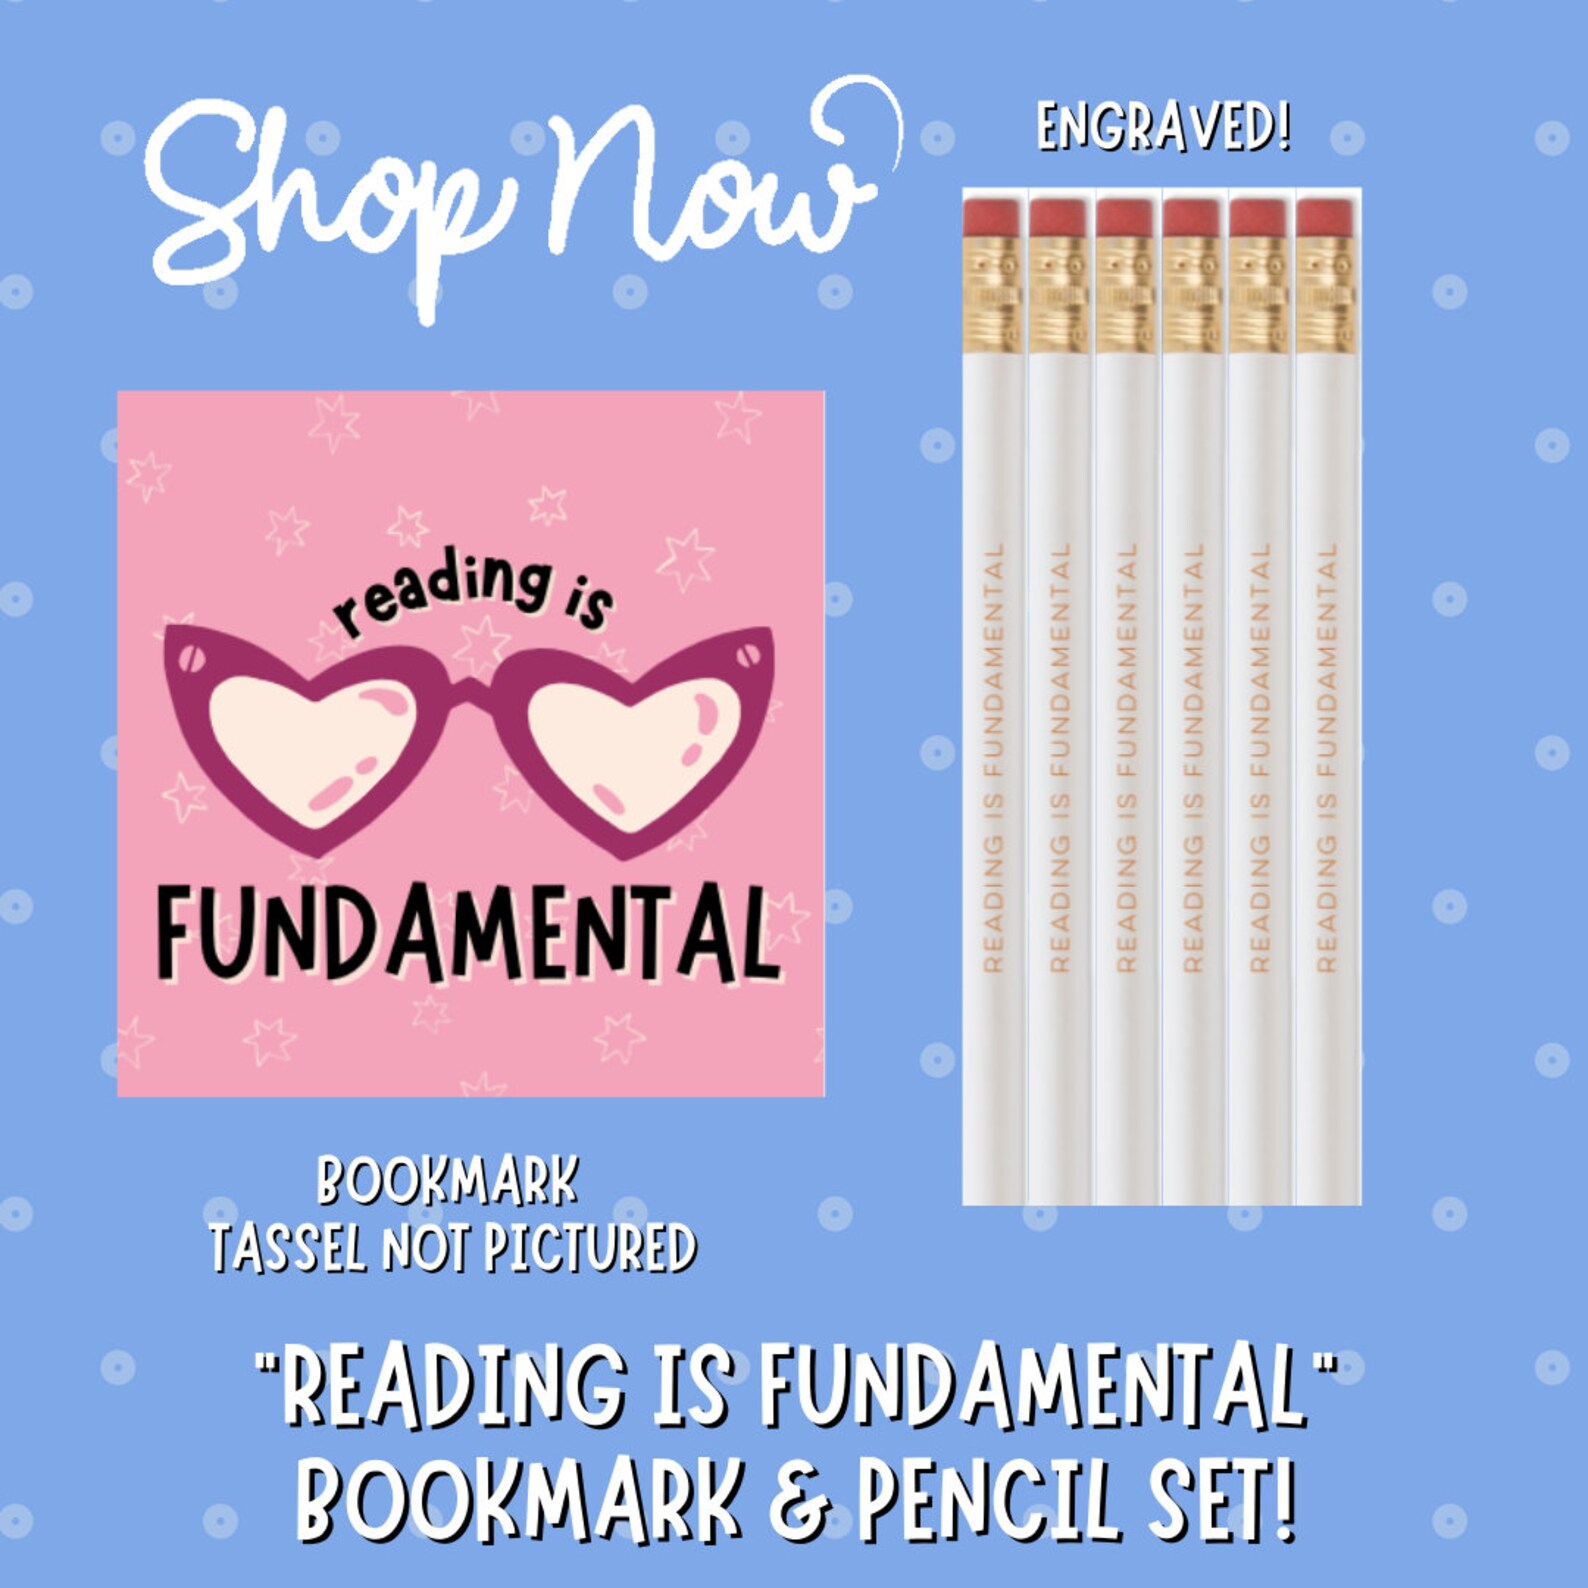 Set of six white pencils that read "Reading is fundamental" in pink and a matching pink bookmark